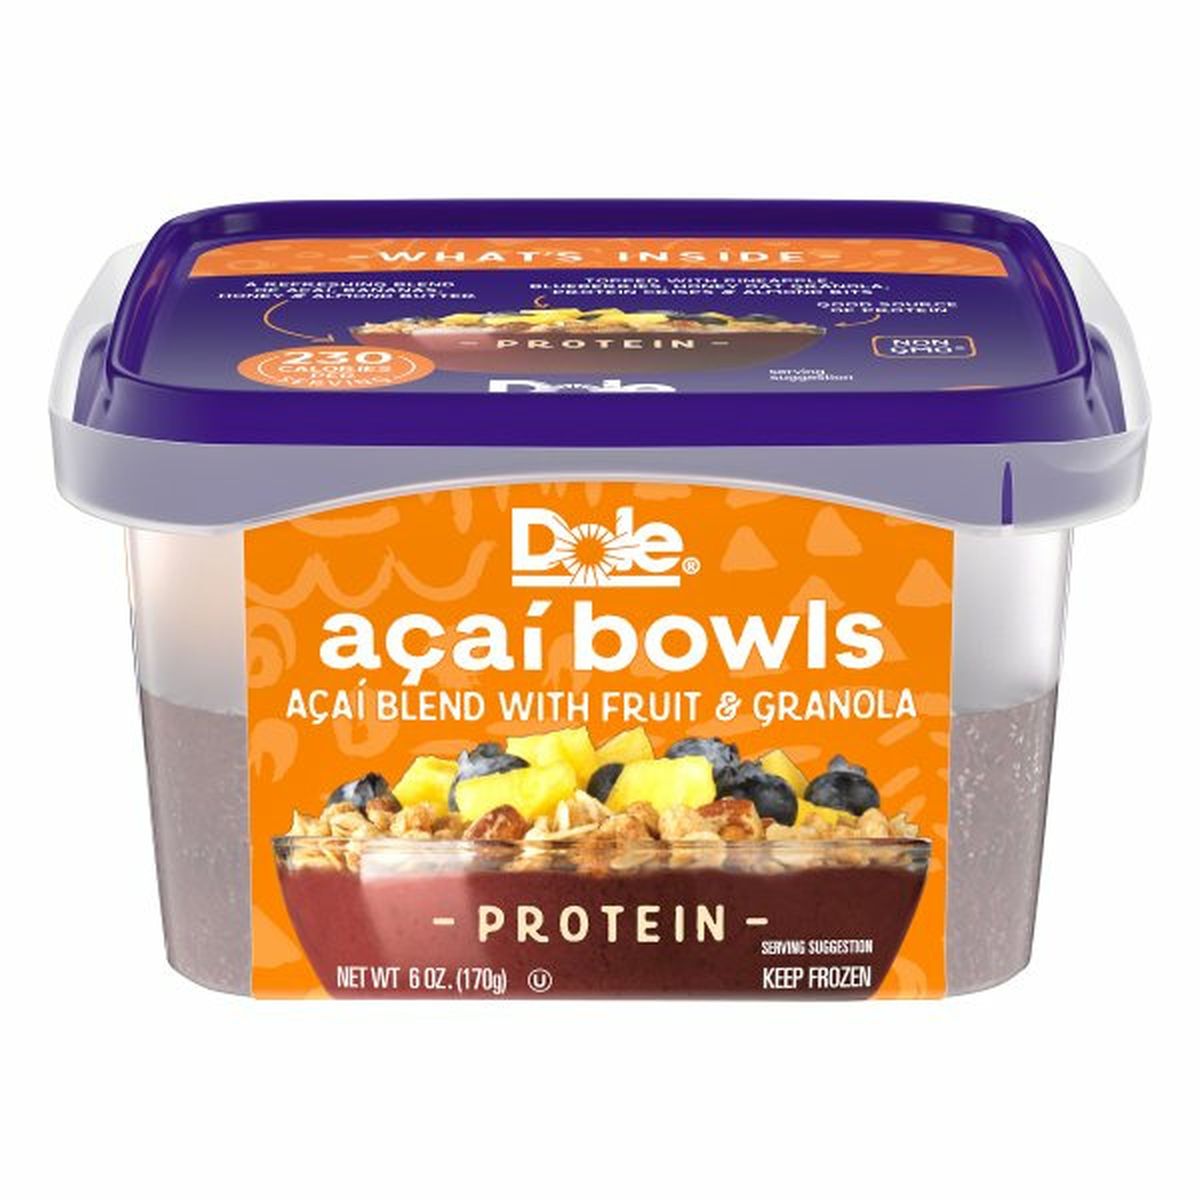 Calories in Dole Acai Bowls, Protein